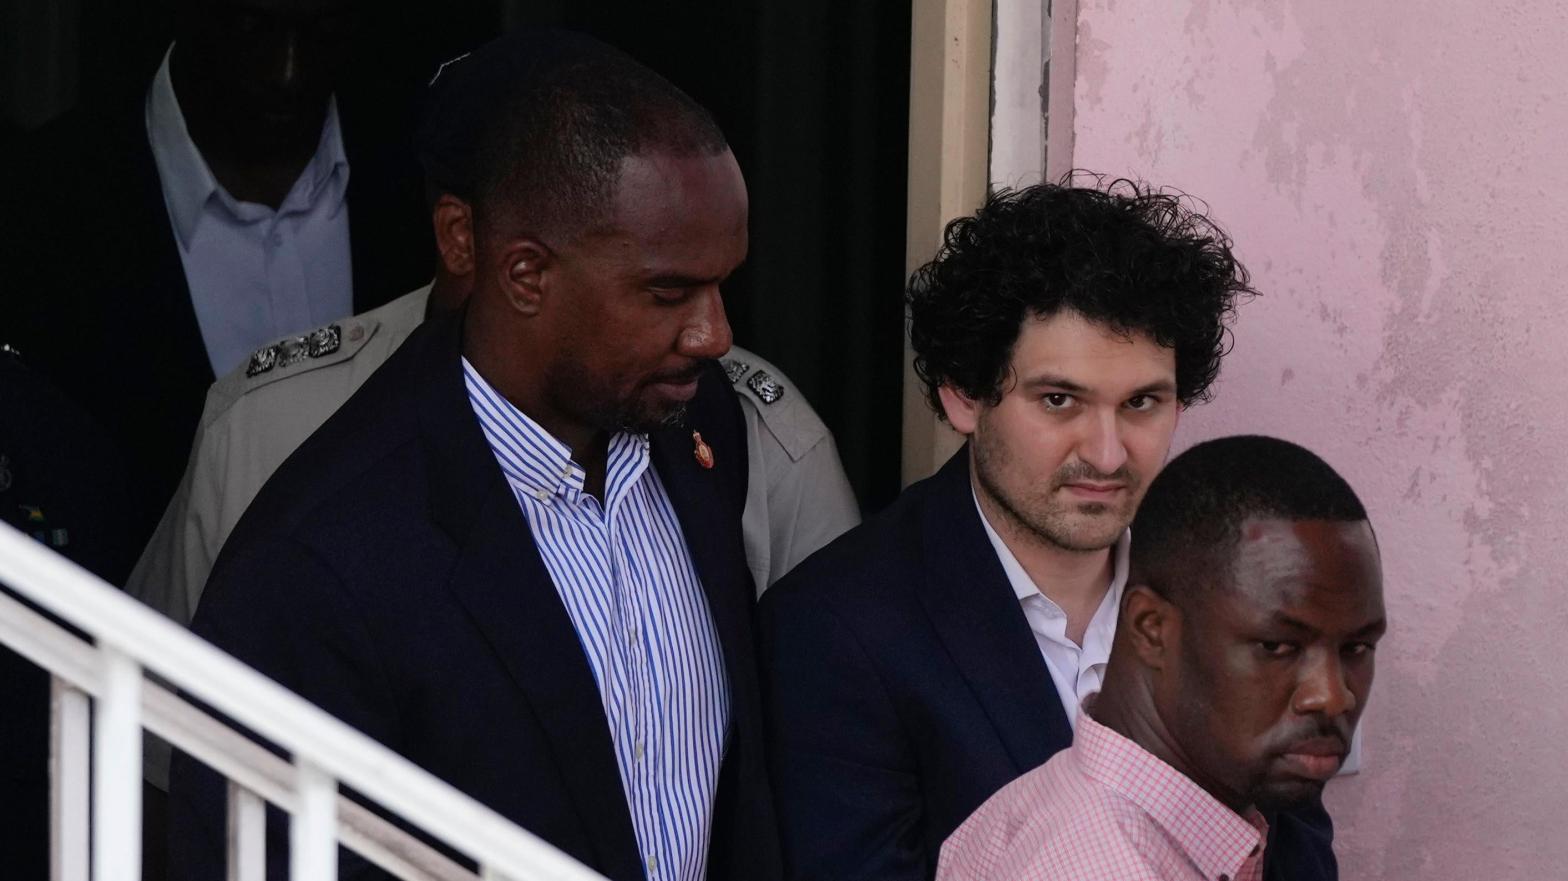 Bankman-Fried was escorted out of Bahamas Magistrate court Monday during a helter-skelter court proceeding over whether he would contest extradition. SBF's return to the U.S. could come as soon as Wednesday, according to multiple reports. (Photo: Rebecca Blackwell, AP)